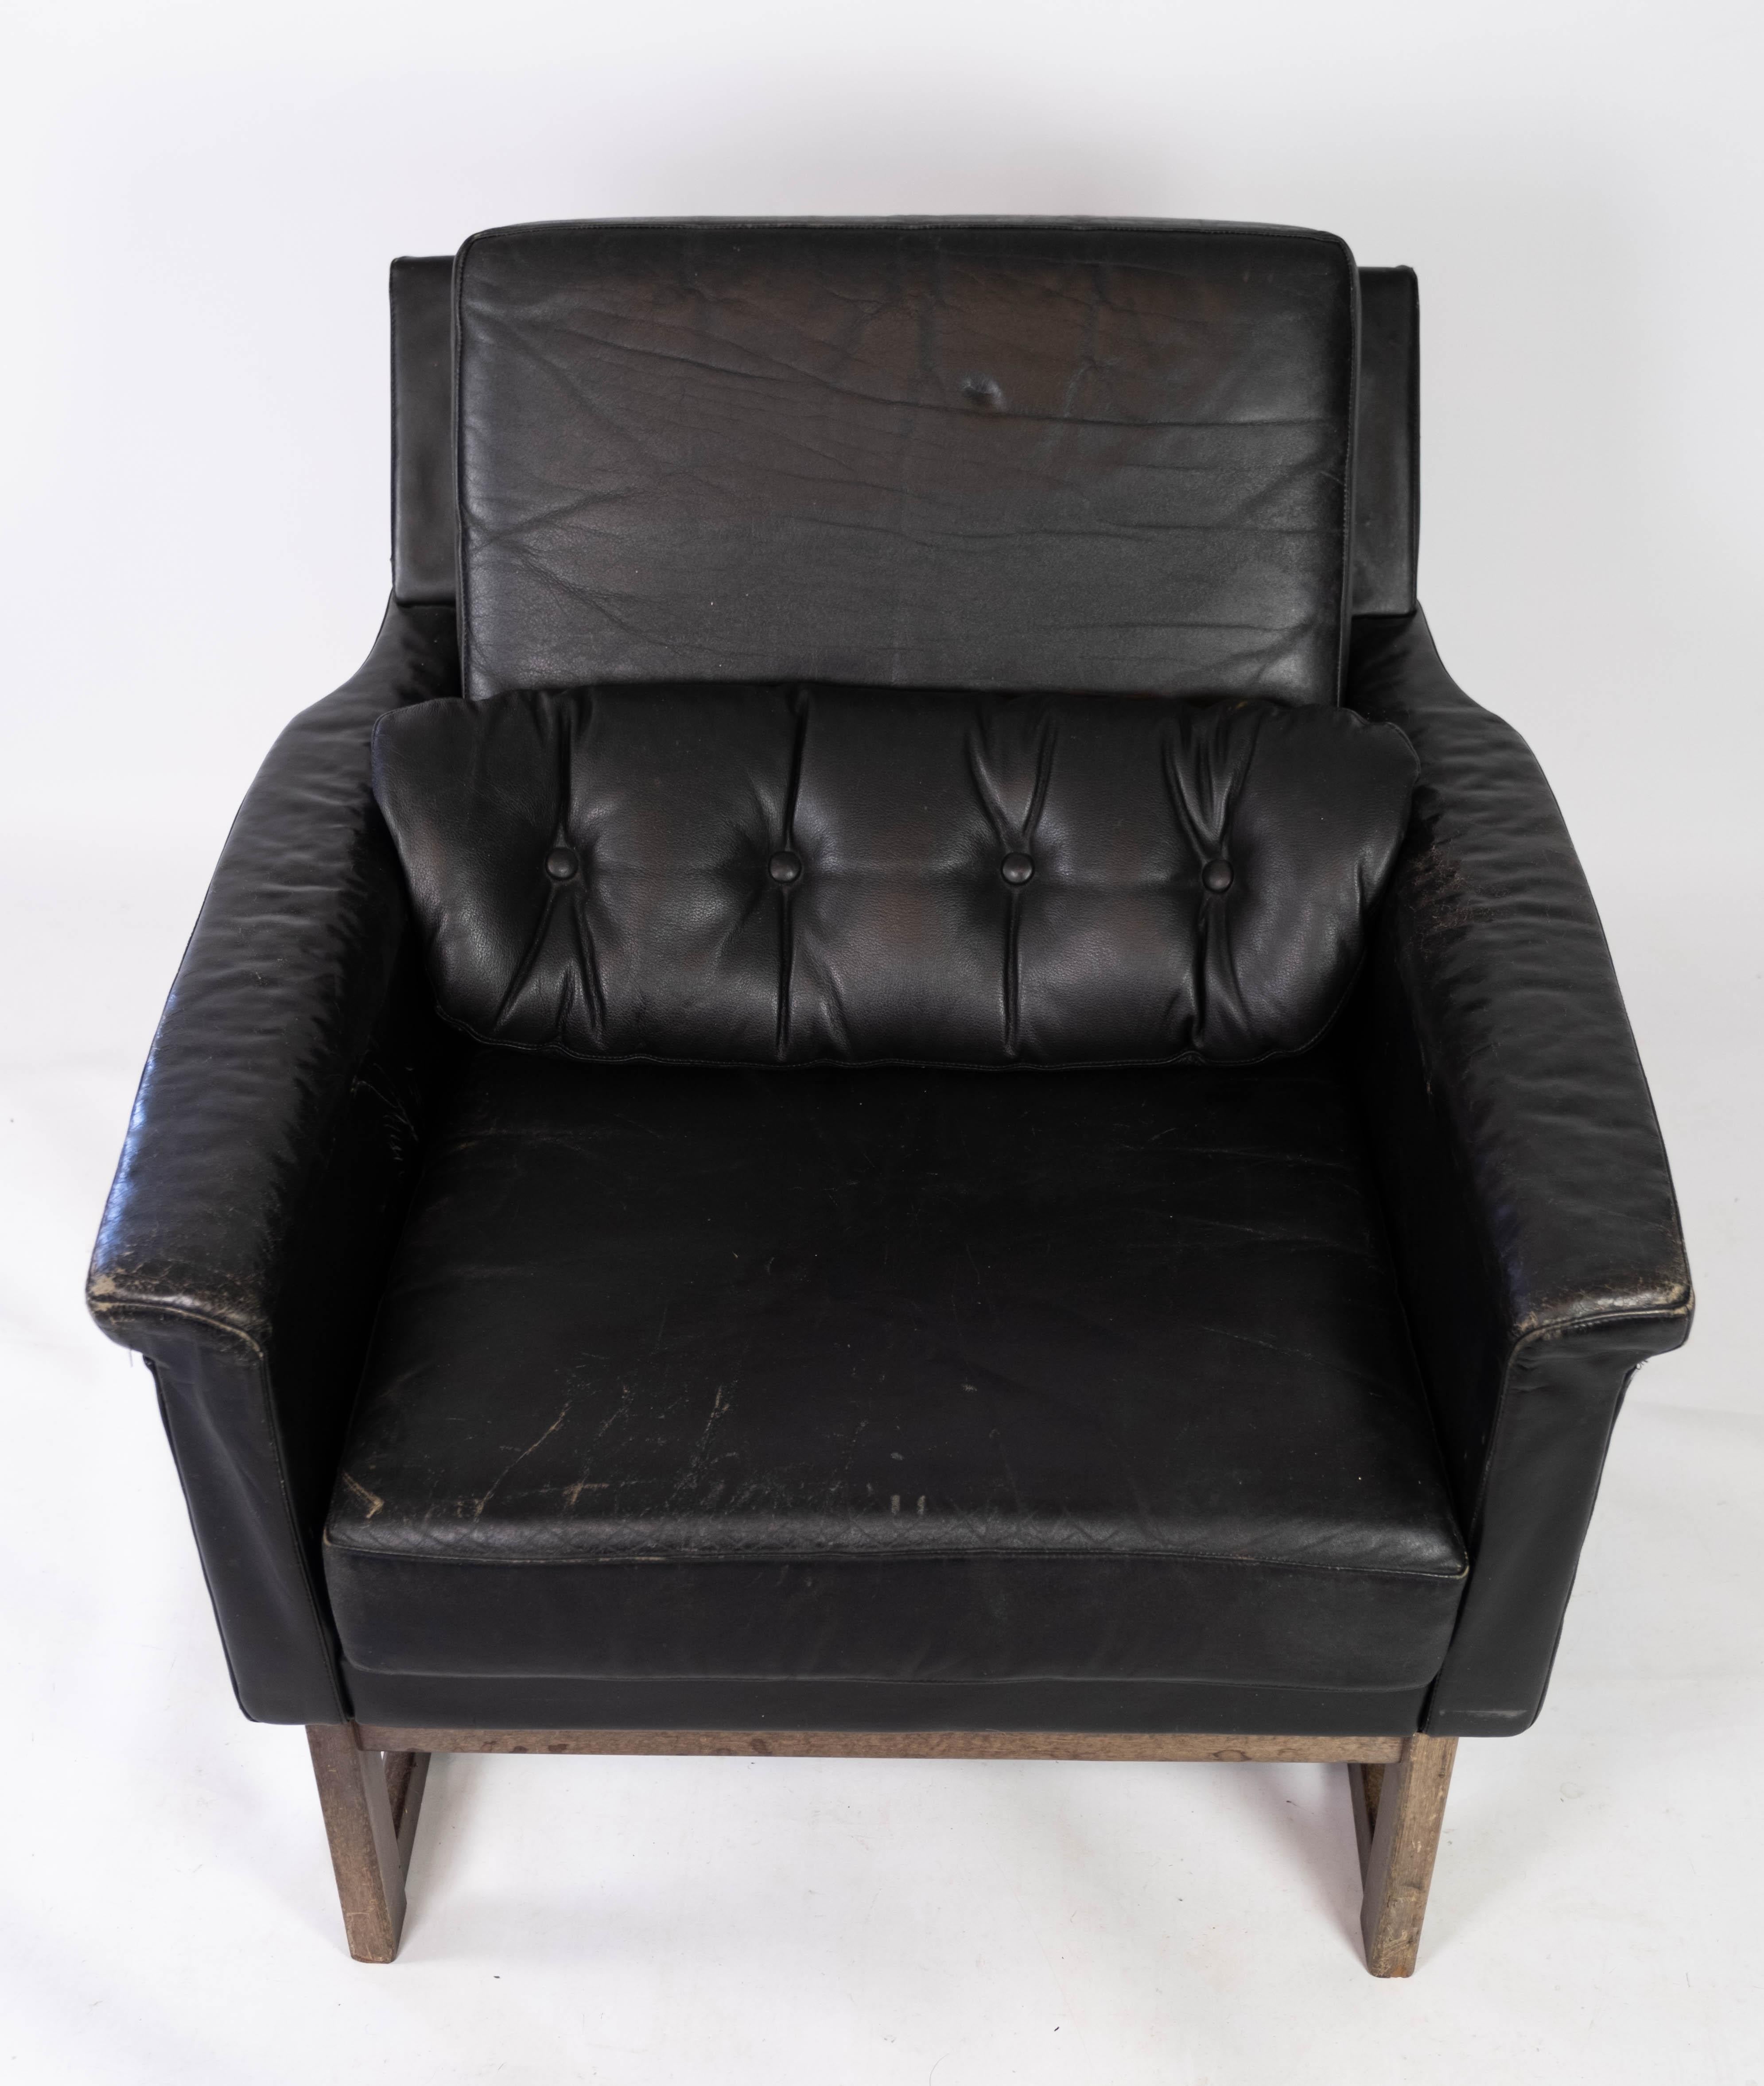 Easy chair upholstered with black leather and legs in wood, designed by Illum Wikkelsø from the 1960s. The chair is in great vintage condition.